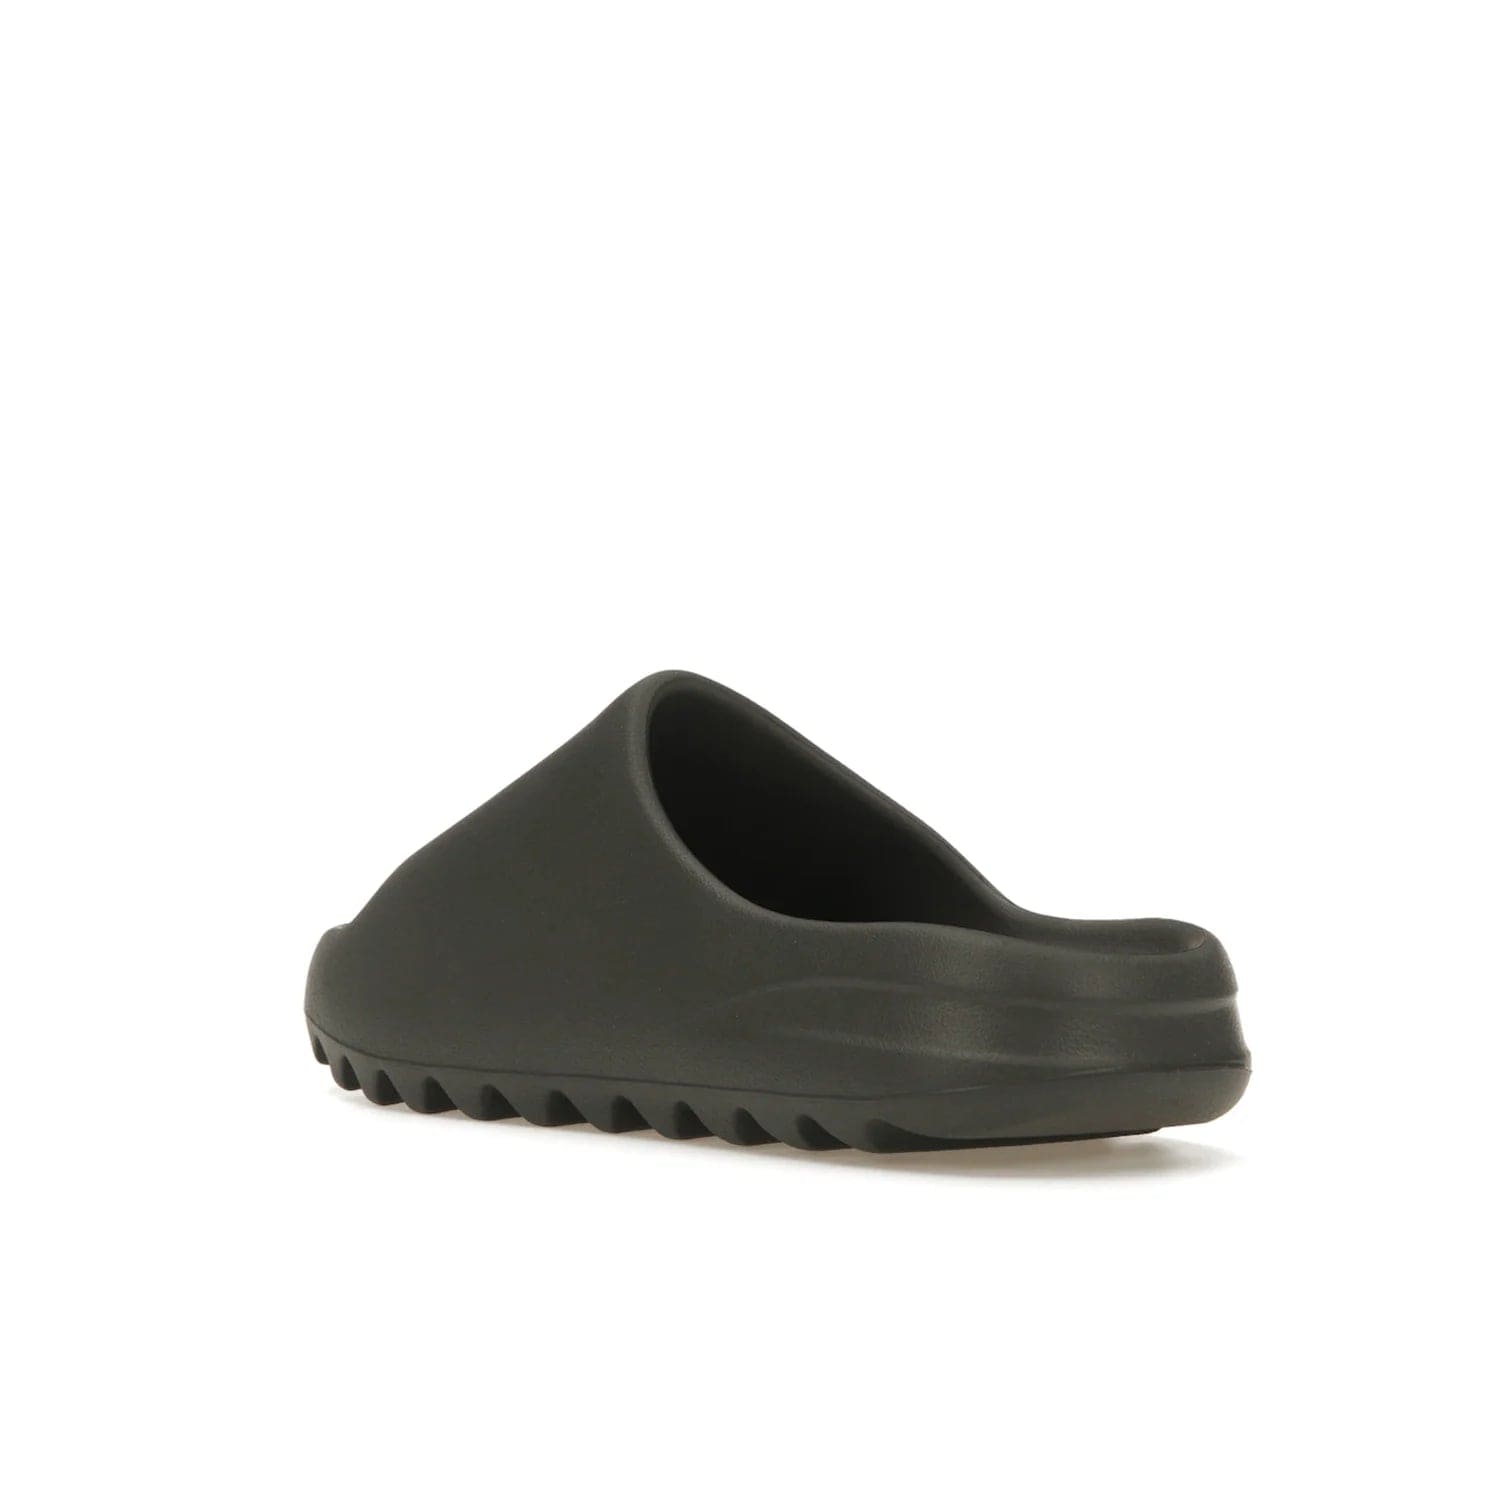 adidas Yeezy Slide Granite - Image 24 - Only at www.BallersClubKickz.com - Introducing the adidas Yeezy Slide Granite with a sleek, soft-to-touch one-piece upper – perfect for making a statement with its minimalistic design and luxurious comfort. Get yours now for only $70.